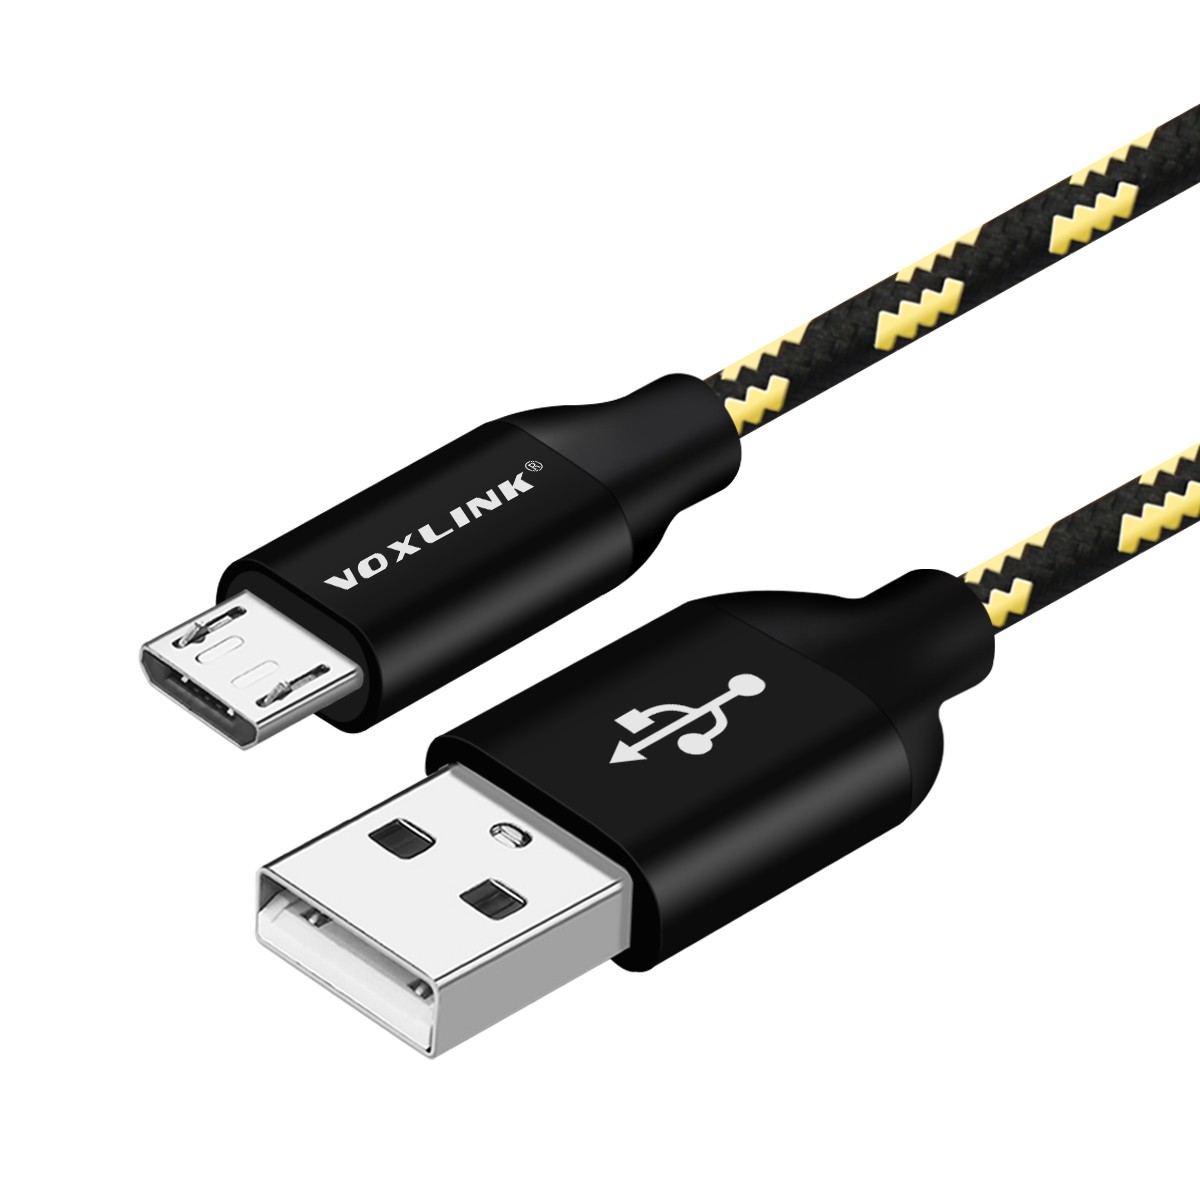 VOXLINK Micro USB Cable Fast Charging 1M/3ft Mobile Phone USB Charger Cable Data Sync Cable for Samsung HTC LG Sony Android Mobile Phones  black 1m